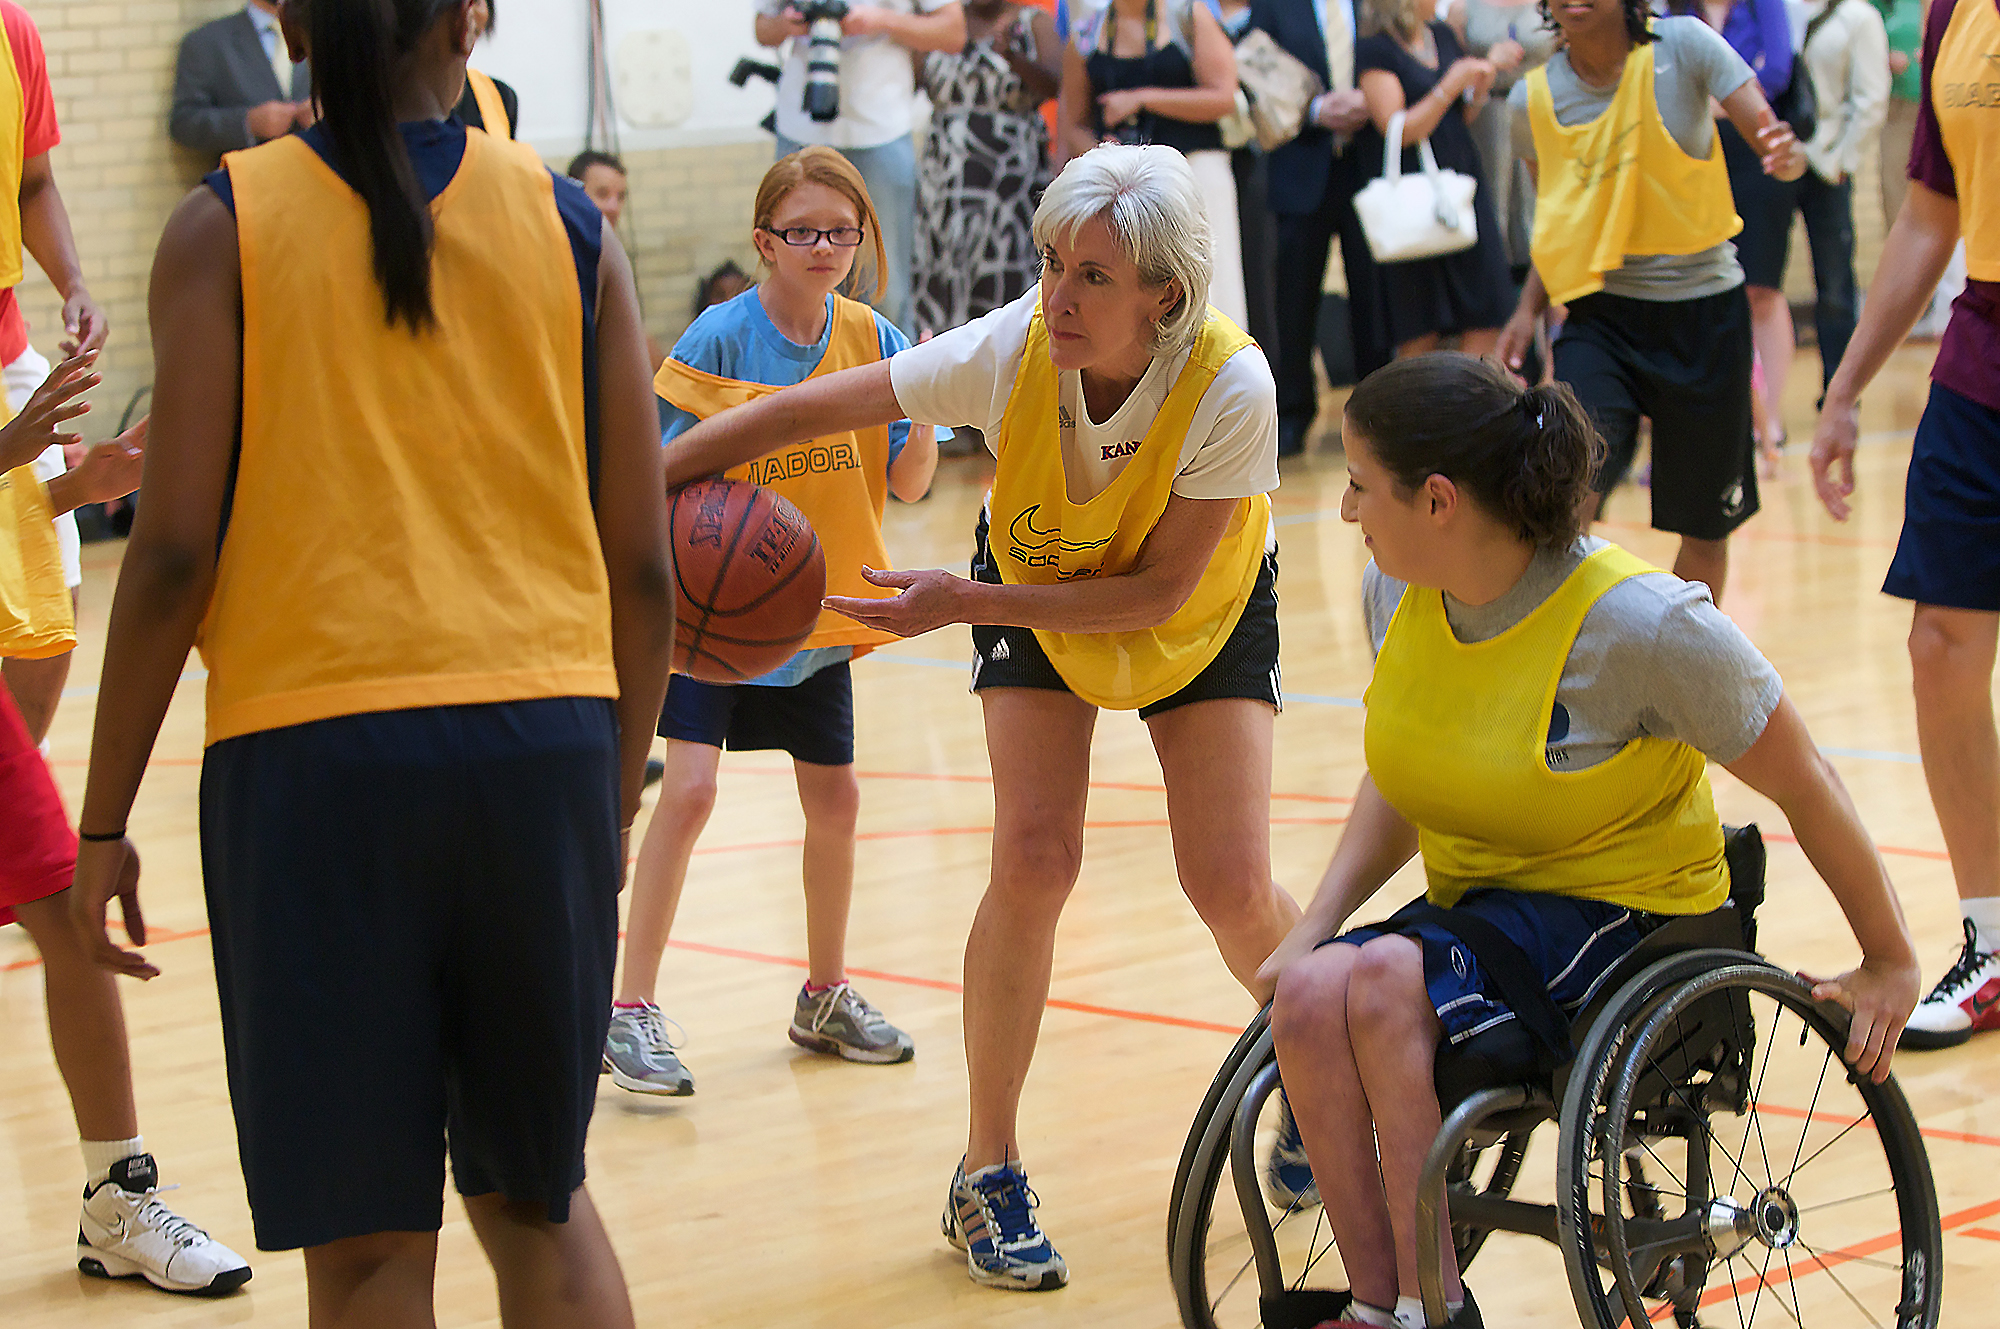 Woman plays basketball with a group of girls, including one in a wheelchair